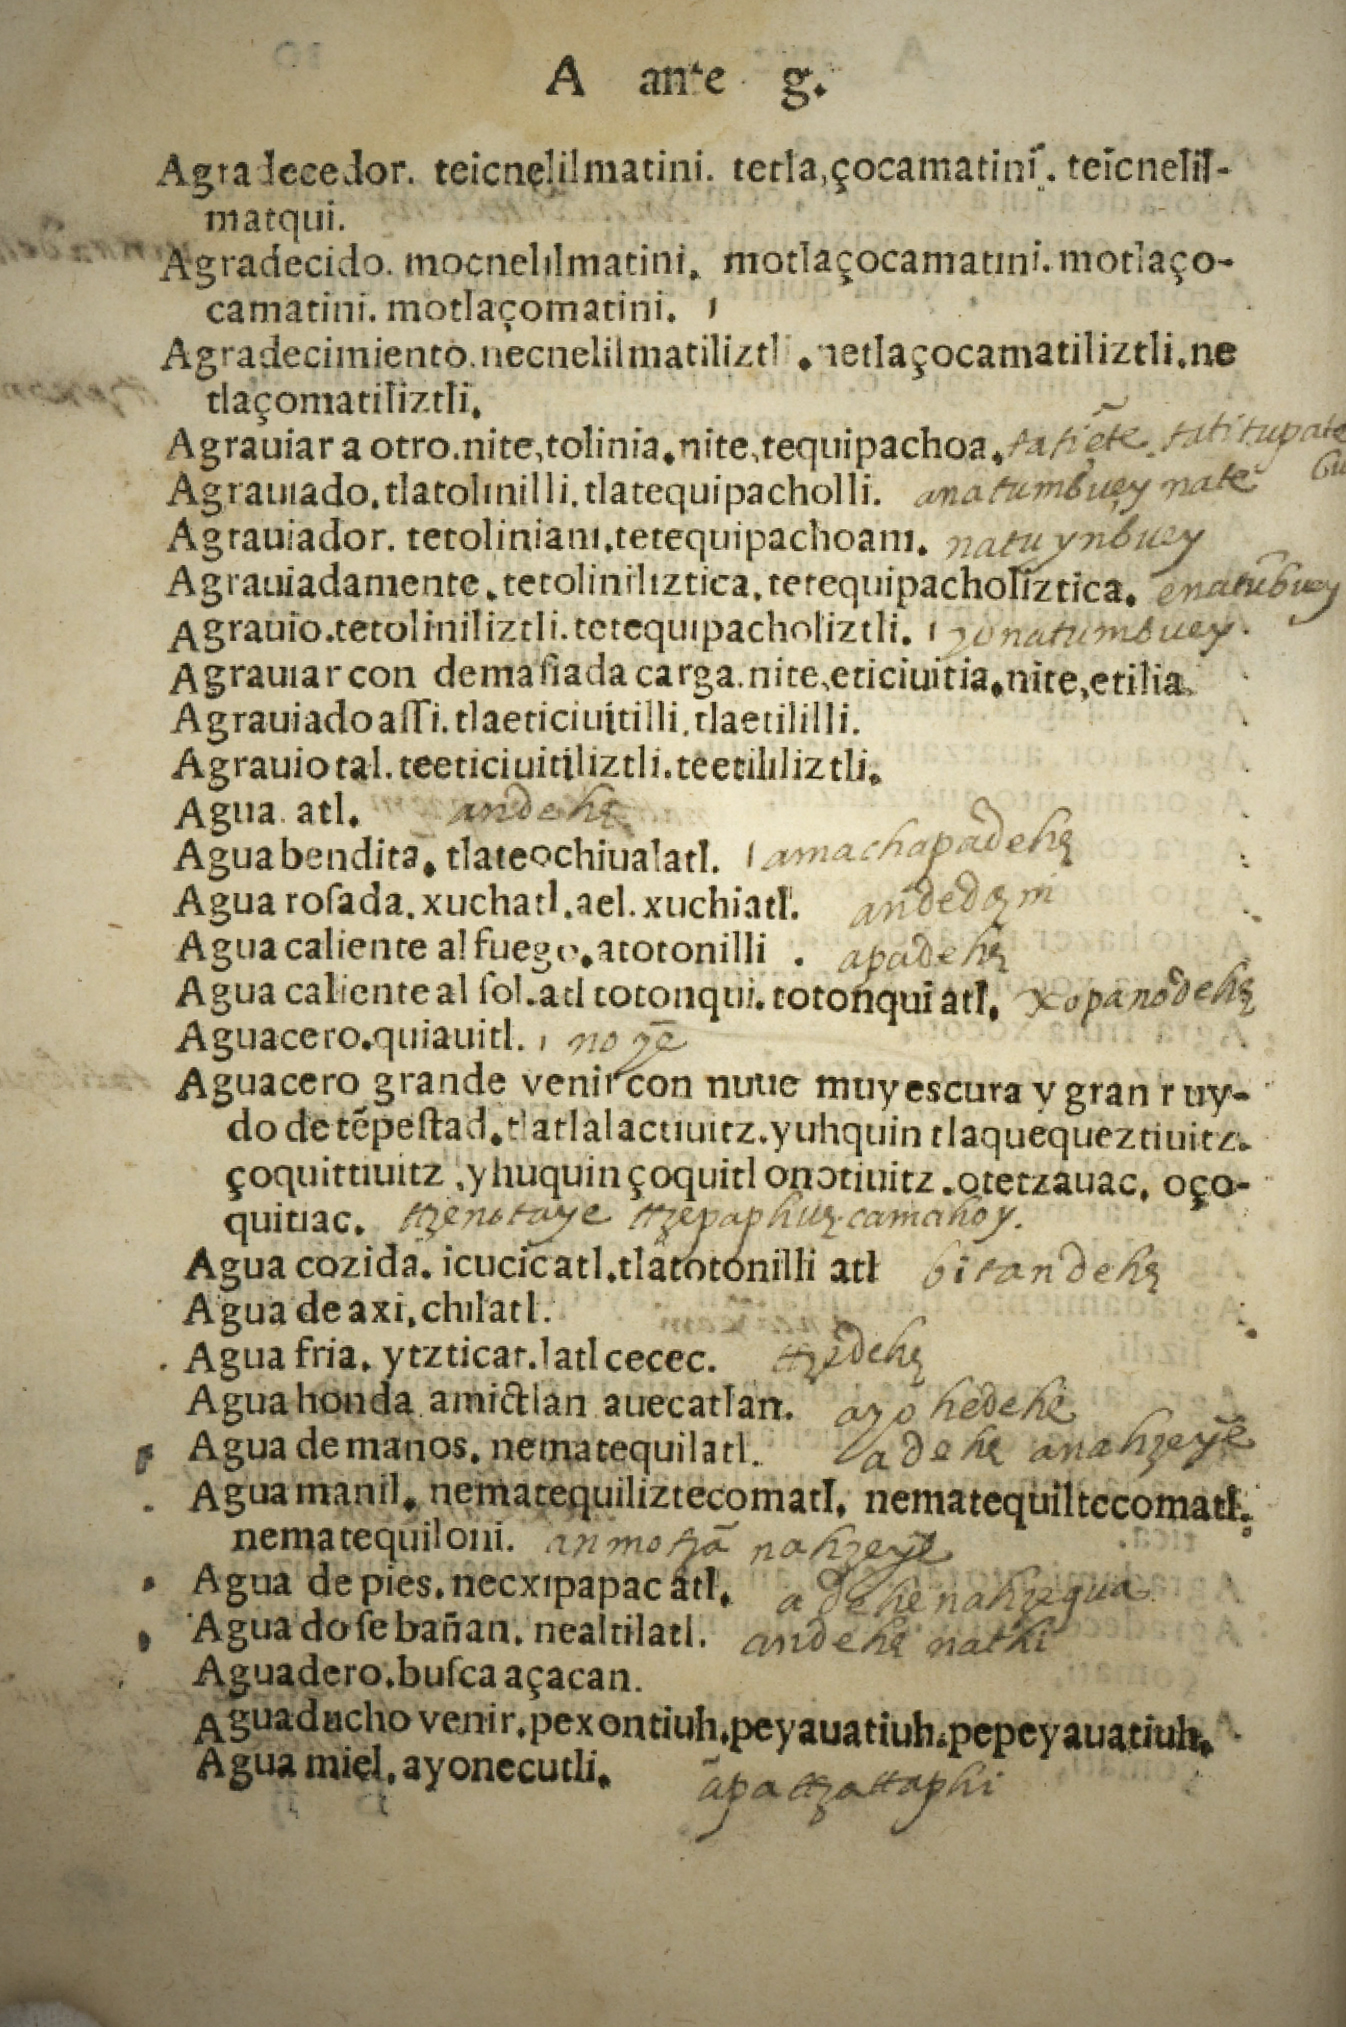 A page of Alonso de Molina’s Spanish-Nahuatl dictionary. Printed in 1555, this is the first work of lexicography published in the Americas. It contains marginal annotations in Otomí, another language common in Central Mexico. This copy is part of the Joaquín García Icazbalceta Collection, held at the Benson Latin American Collection.